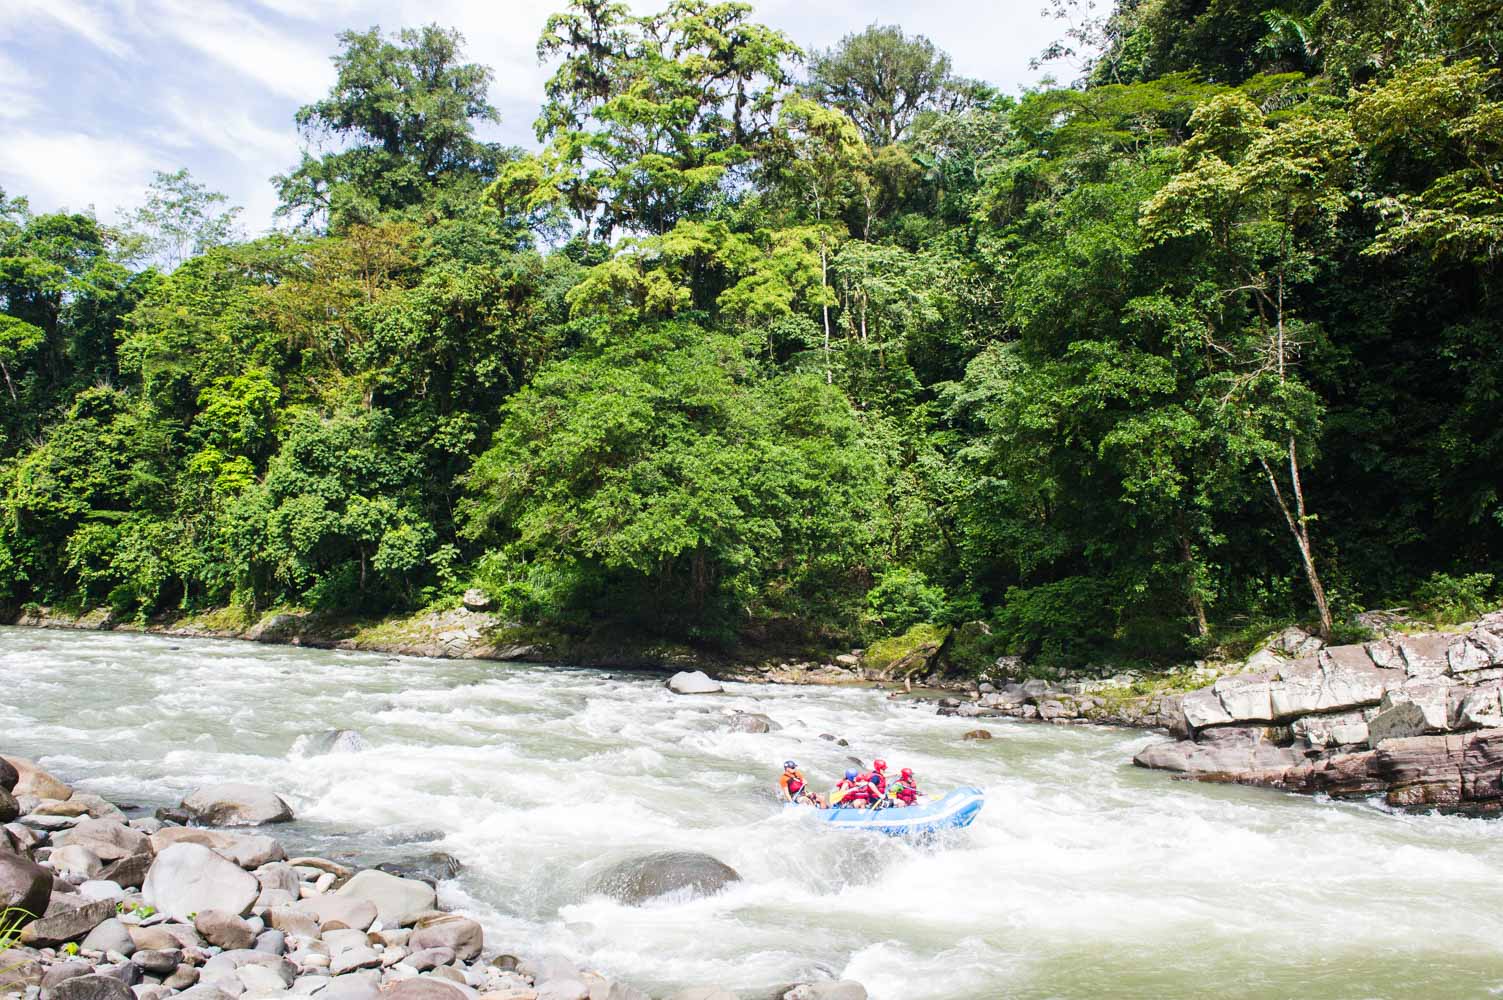 Top Adventures in Costa Rica - Rafting the Río Pacuare